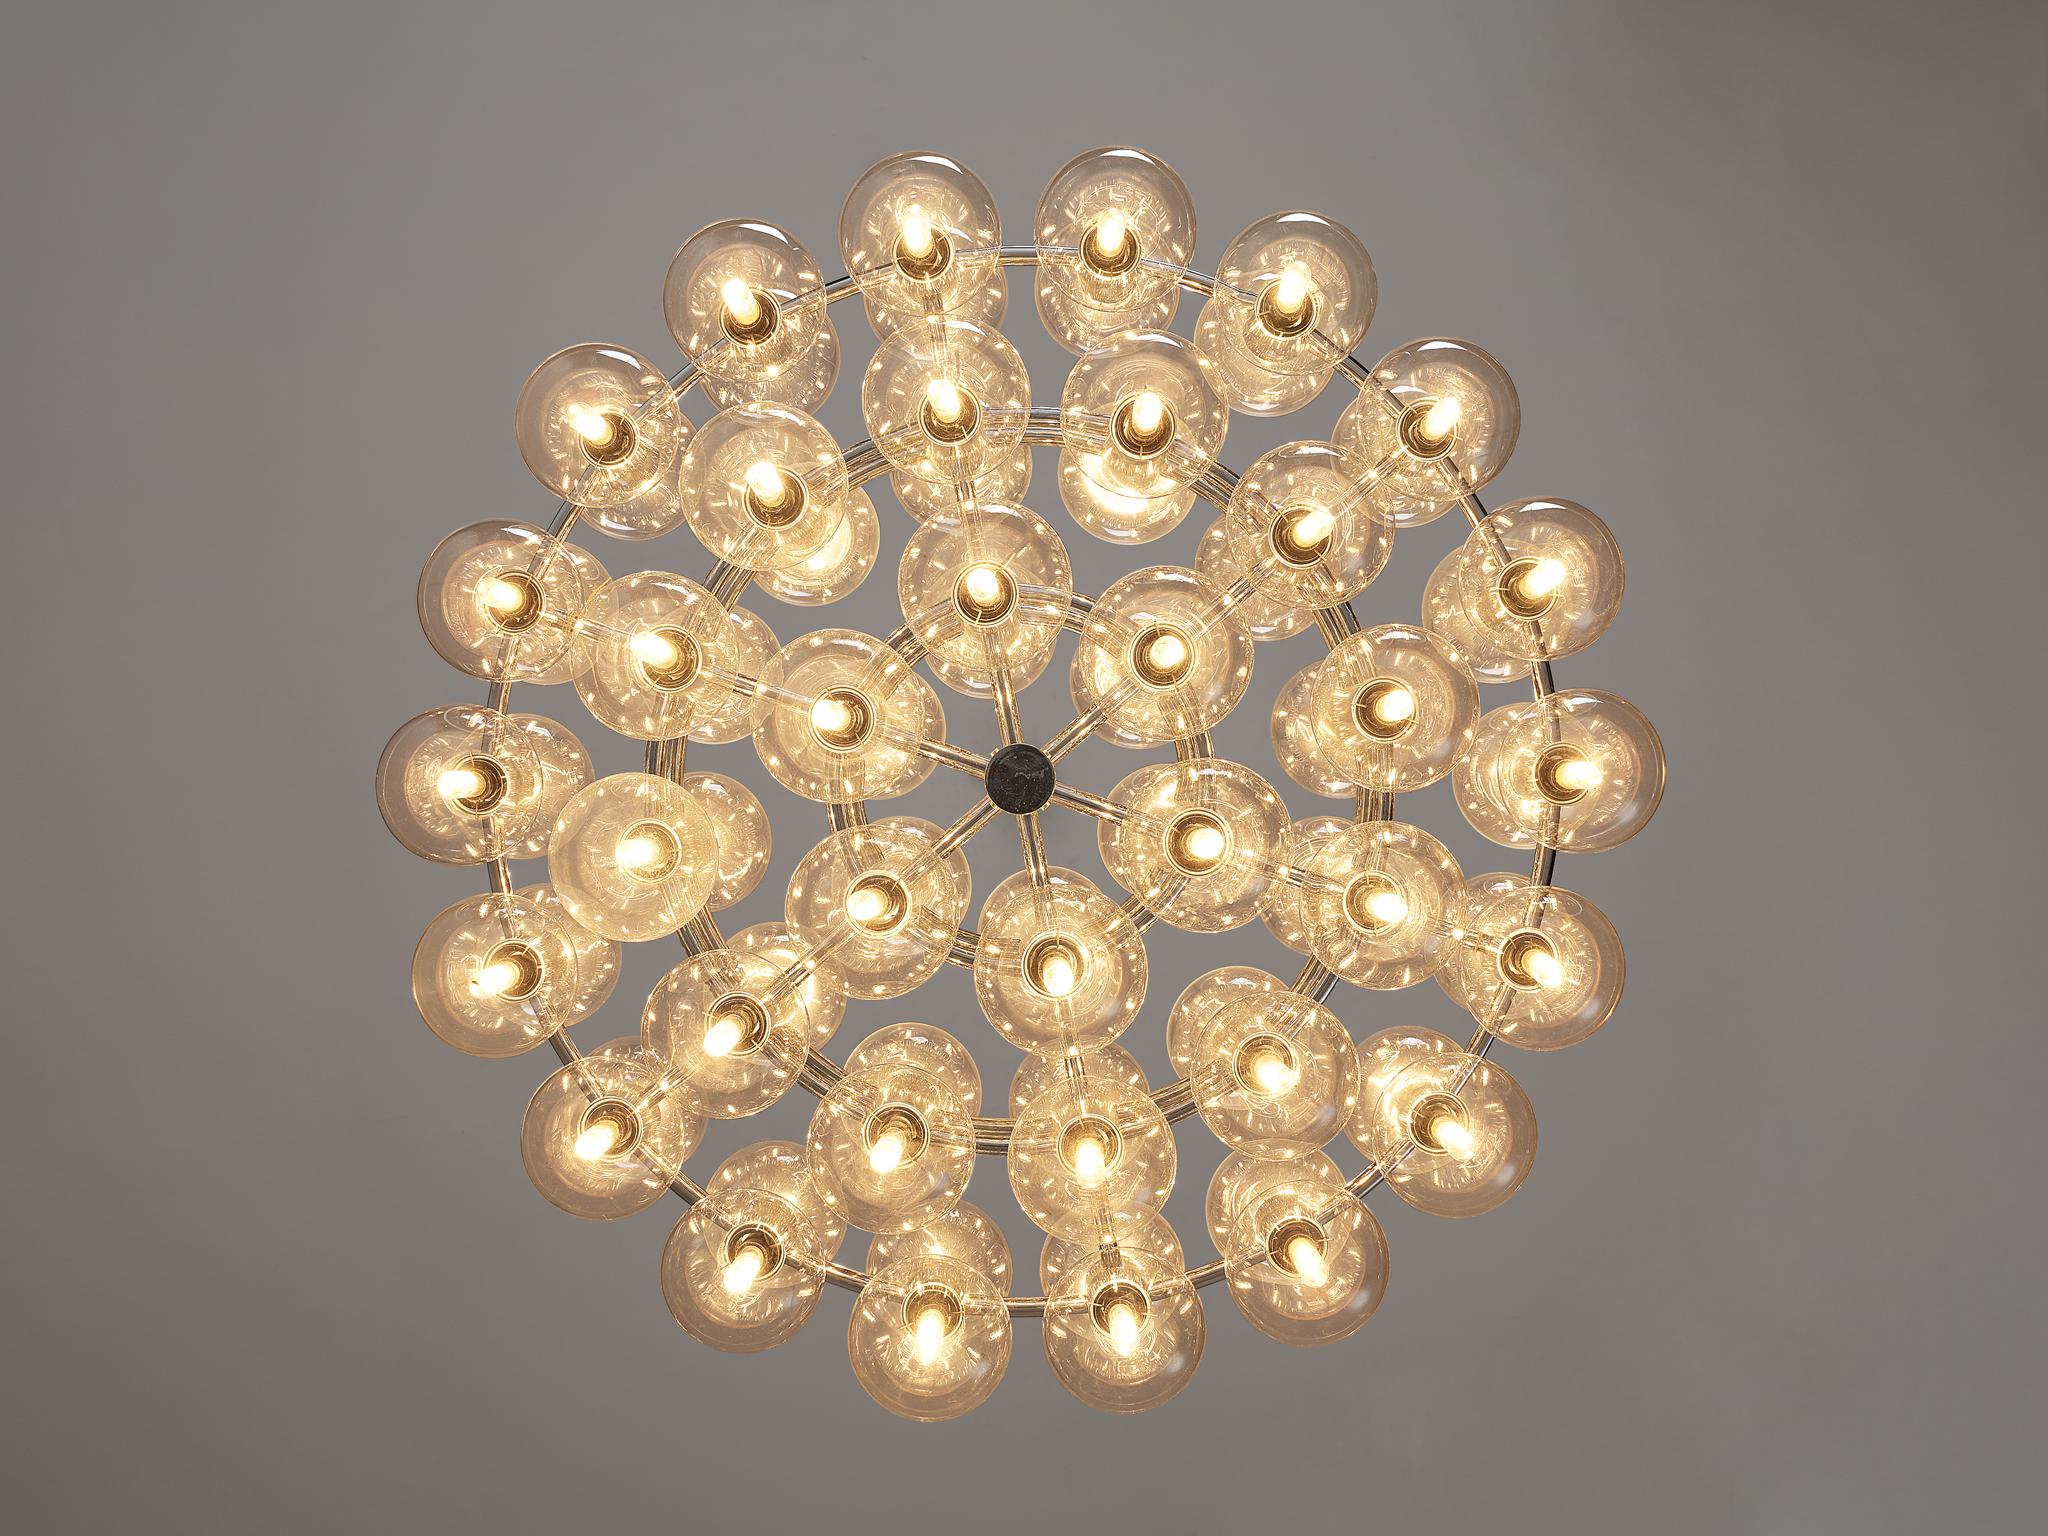 Mid-Century Modern  Motoko Ishii for Staff Leuchten Large Chandelier in Chrome with 72 Glass Orbs For Sale